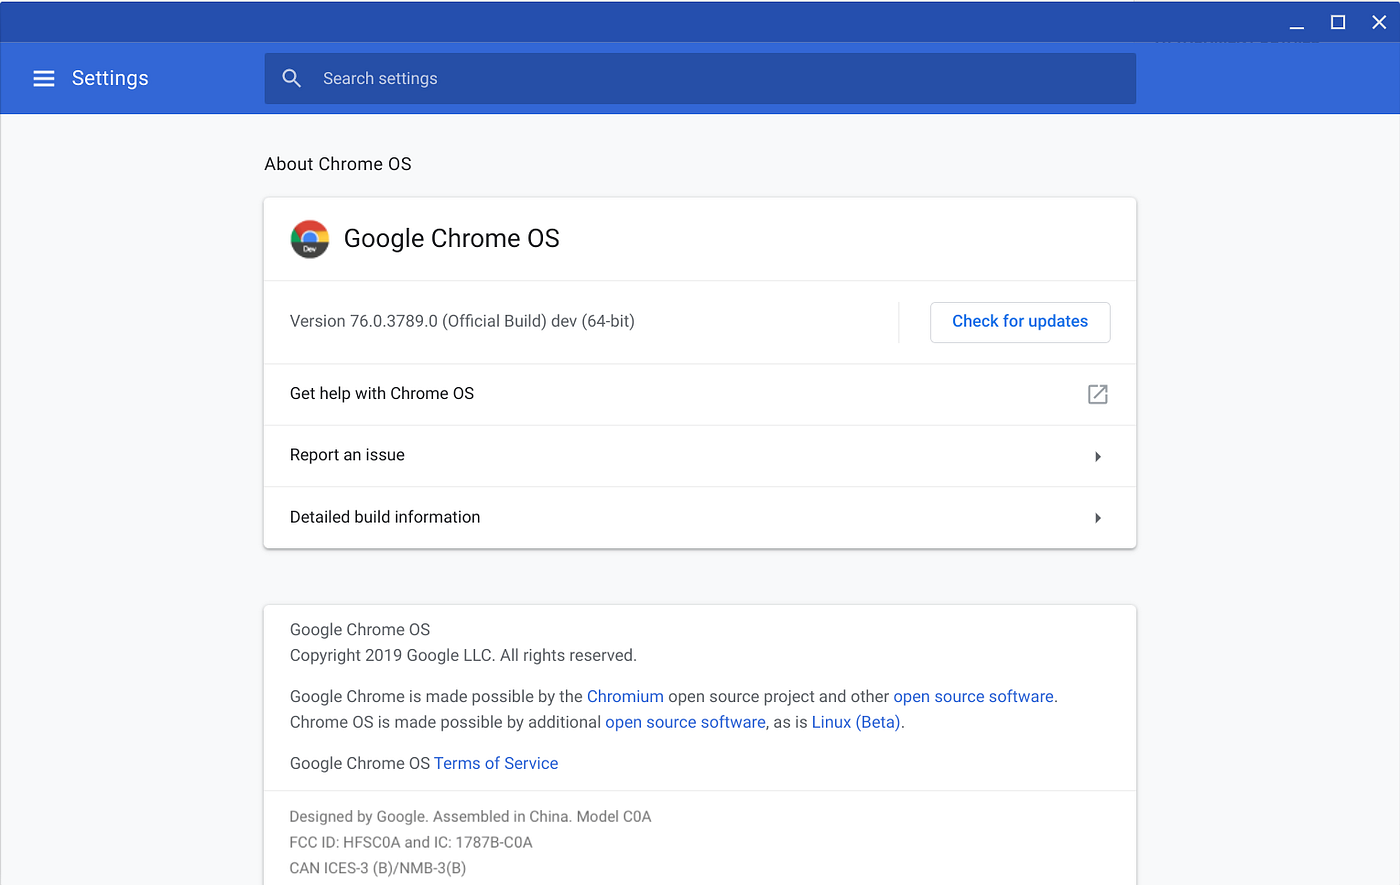 ChromeOS 76.0.3789.0 Rolling out to the Dev Channel — Adds Crostini Flag | by Keith I Myers | Medium